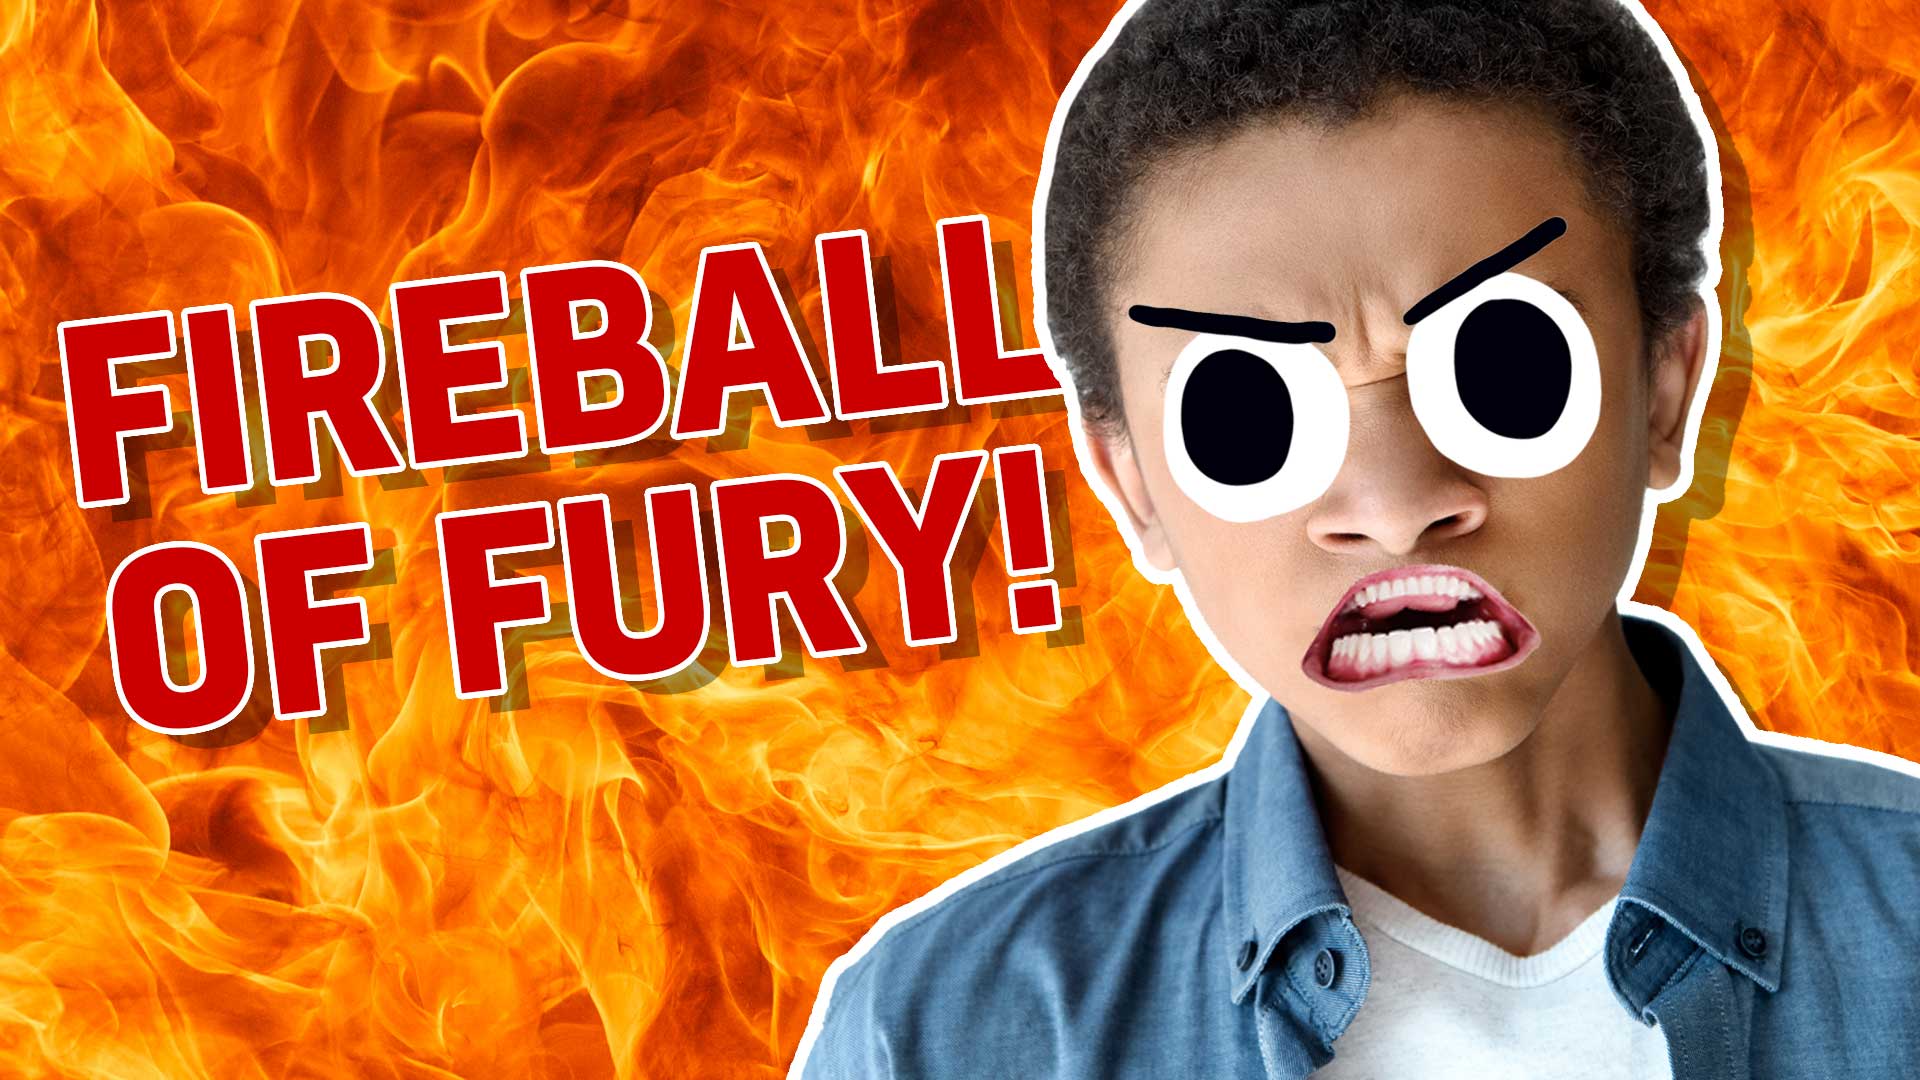 Result: A Fireball of Fury